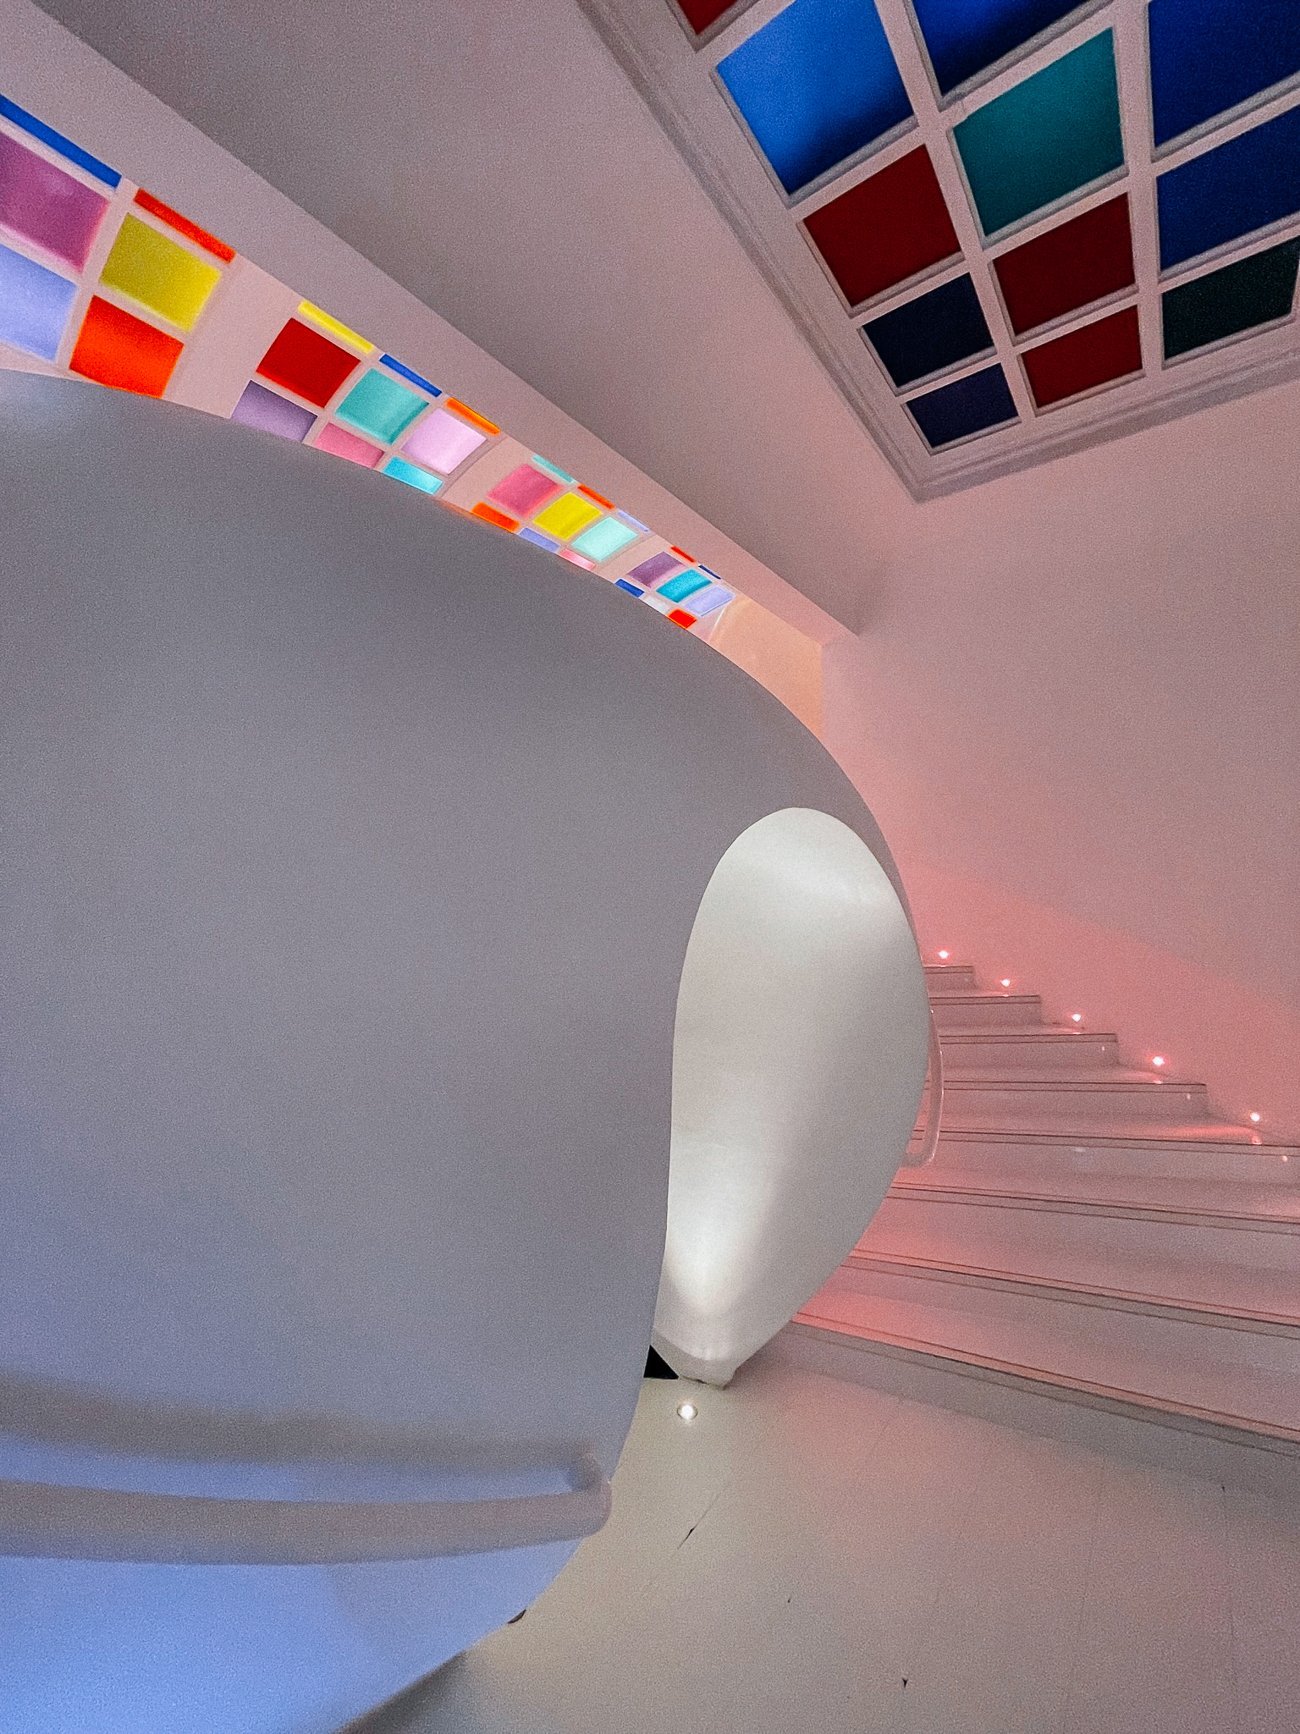 Technicolor ceiling and white bathroom at Sketch with curved staircase